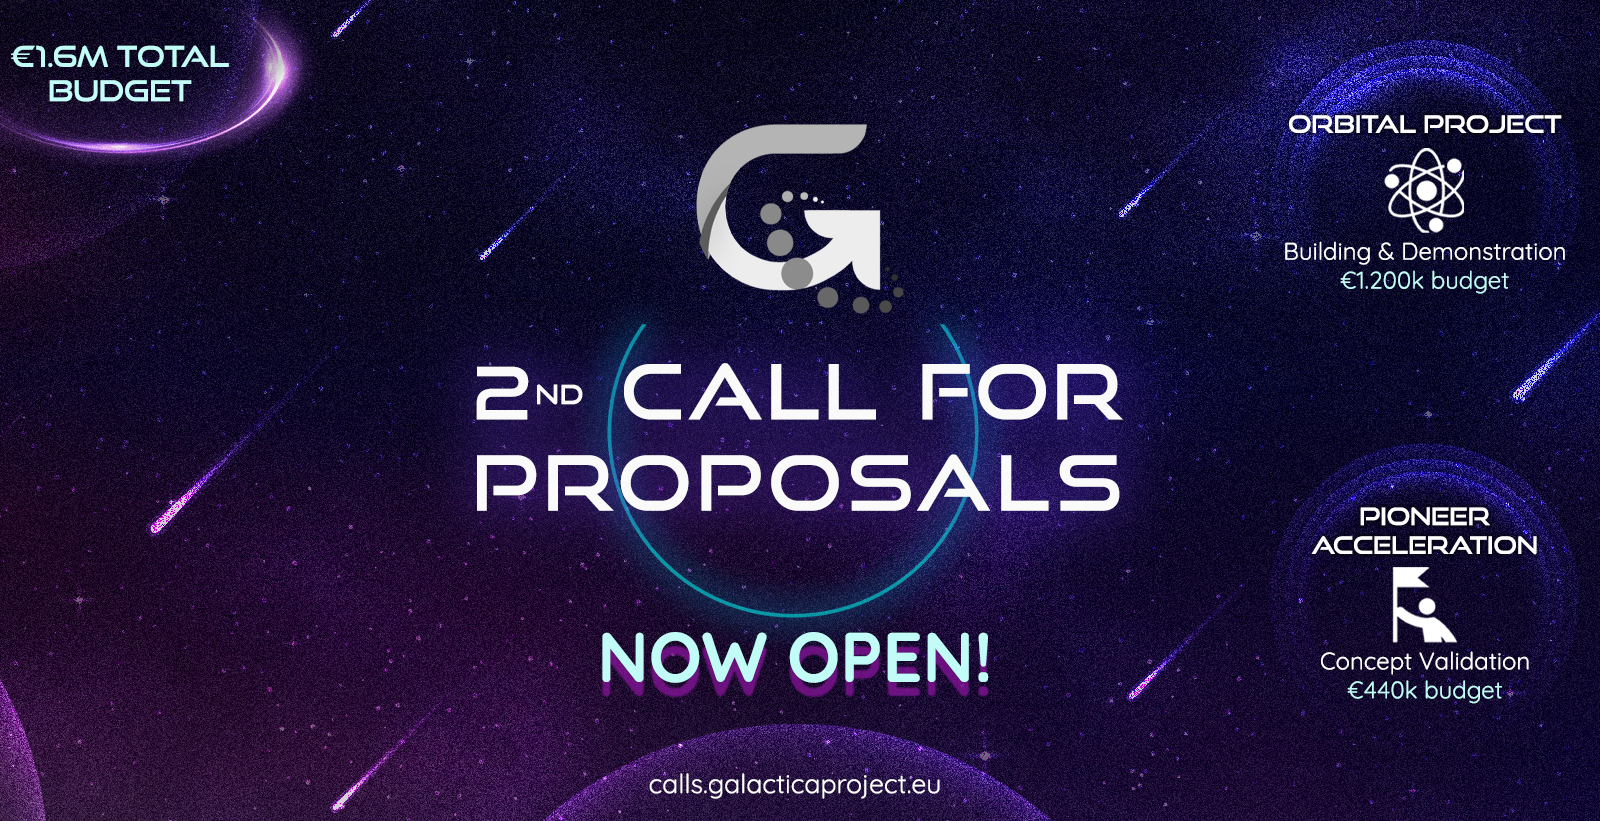 Galactica 2nd call for proposals